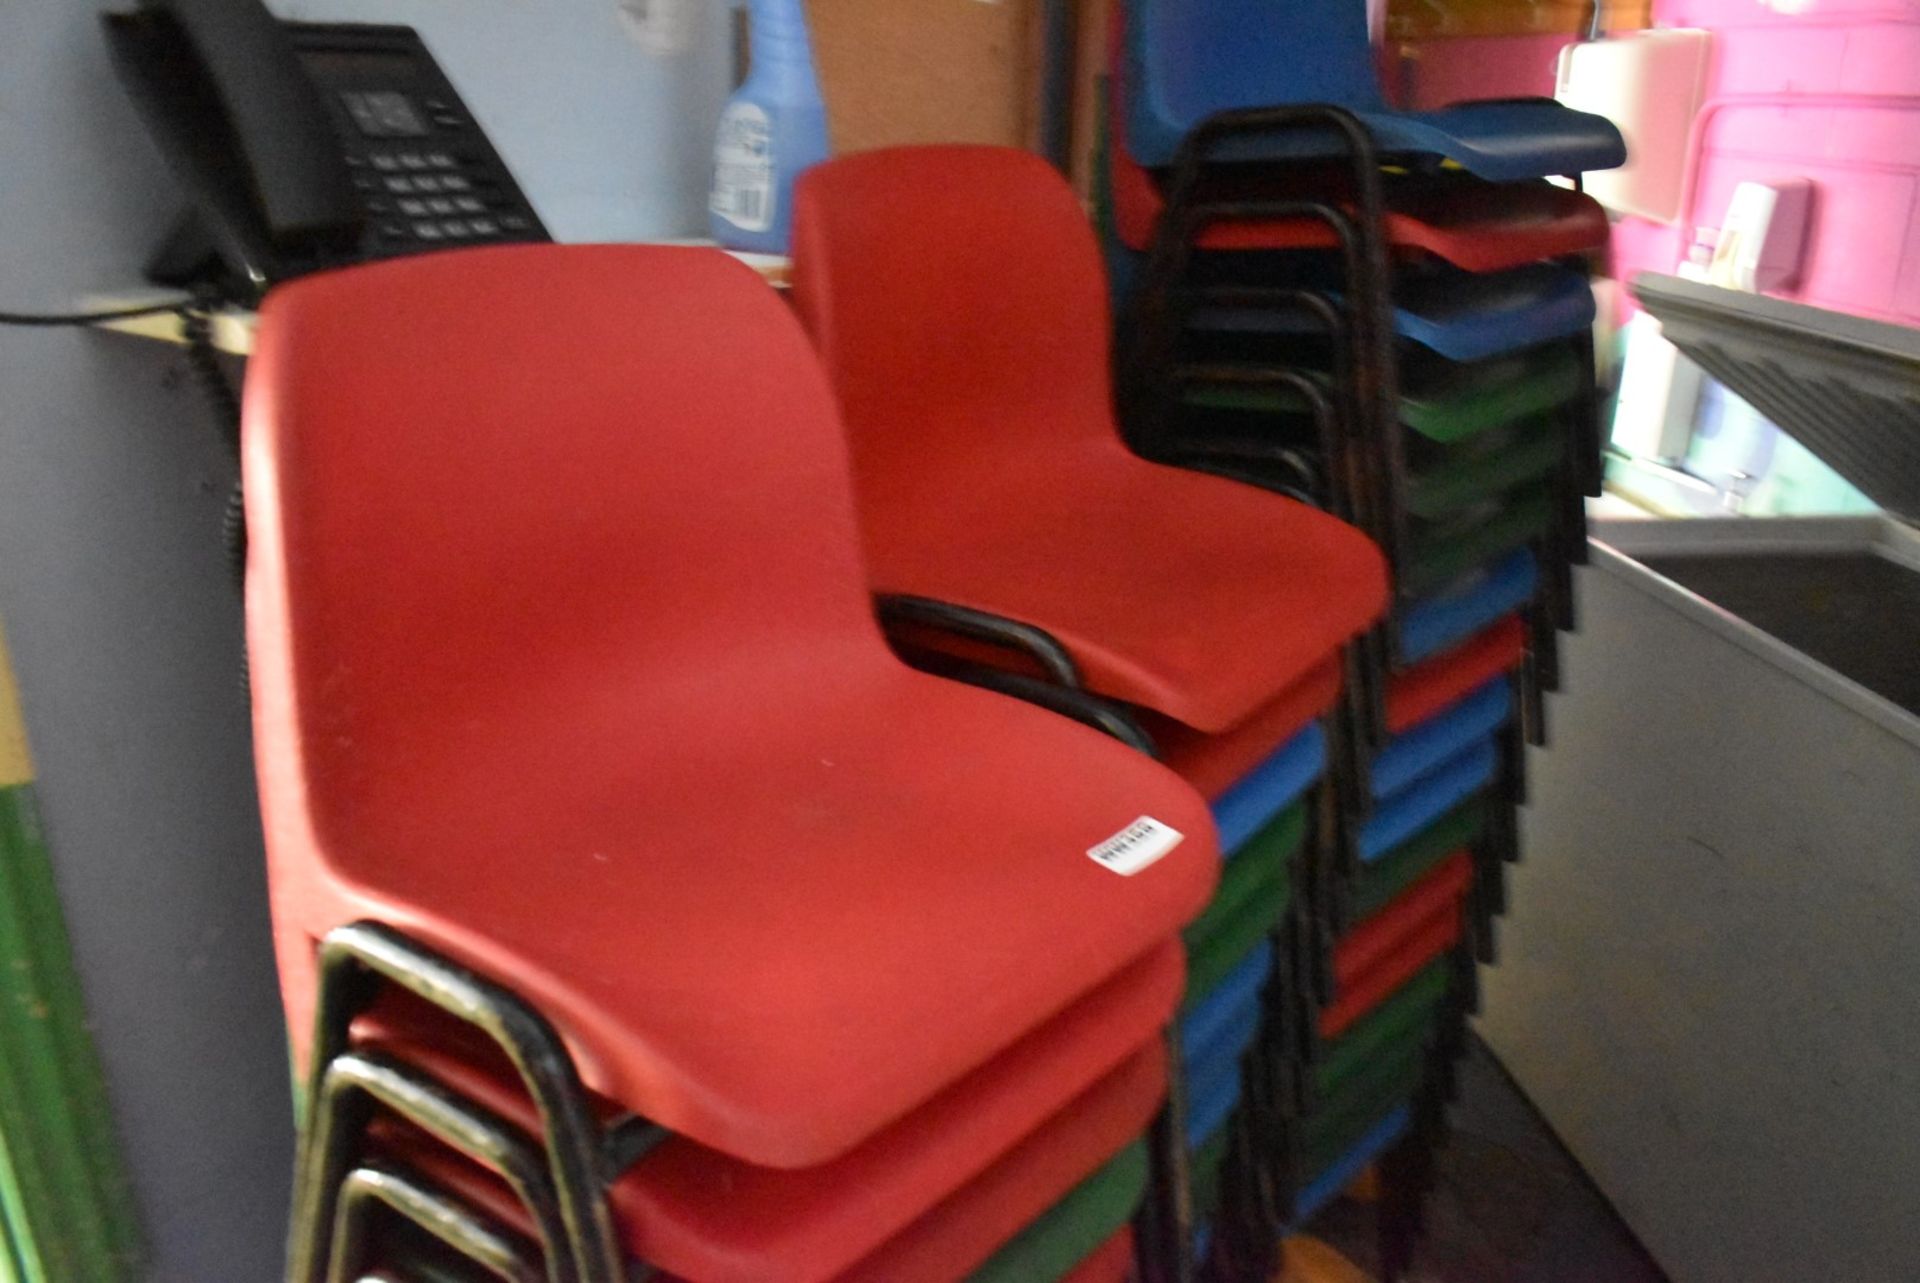 47 x Plastic Stackable Children's Chairs With Black Metal Legs - Various Colours - Ref WW359 U - - Image 3 of 3